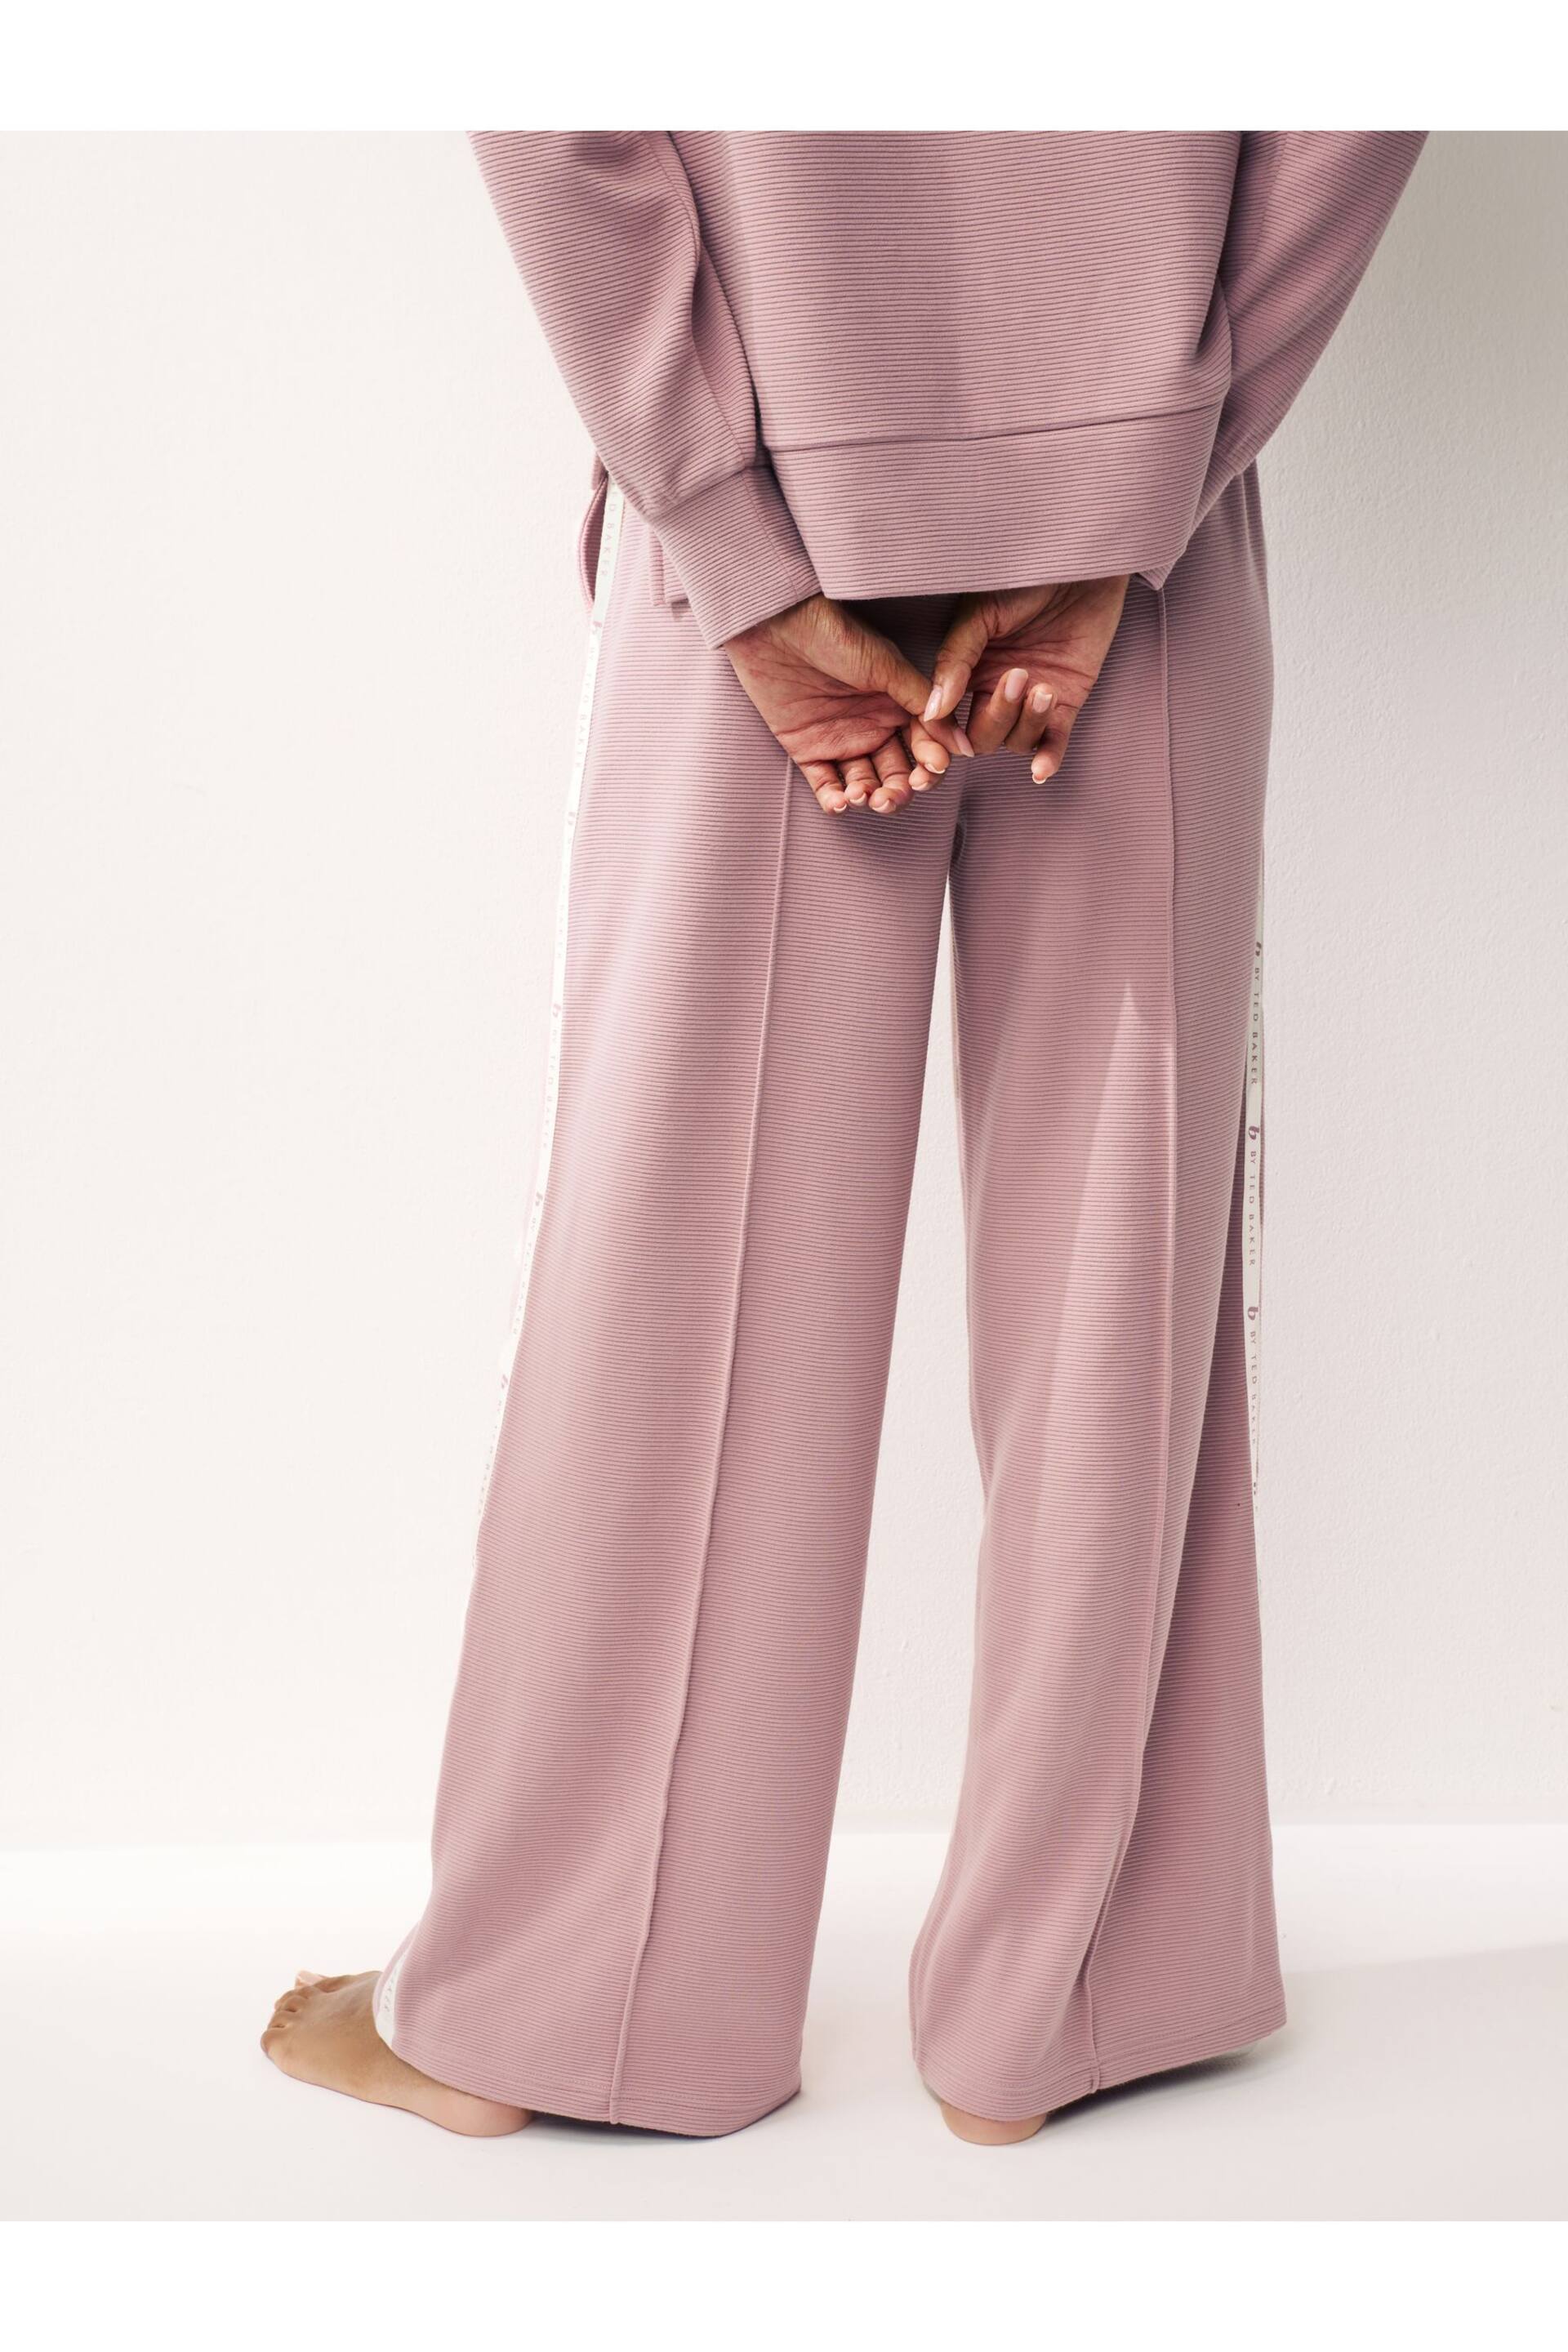 B by Ted Baker Ribbed Wide Leg Joggers - Image 3 of 5